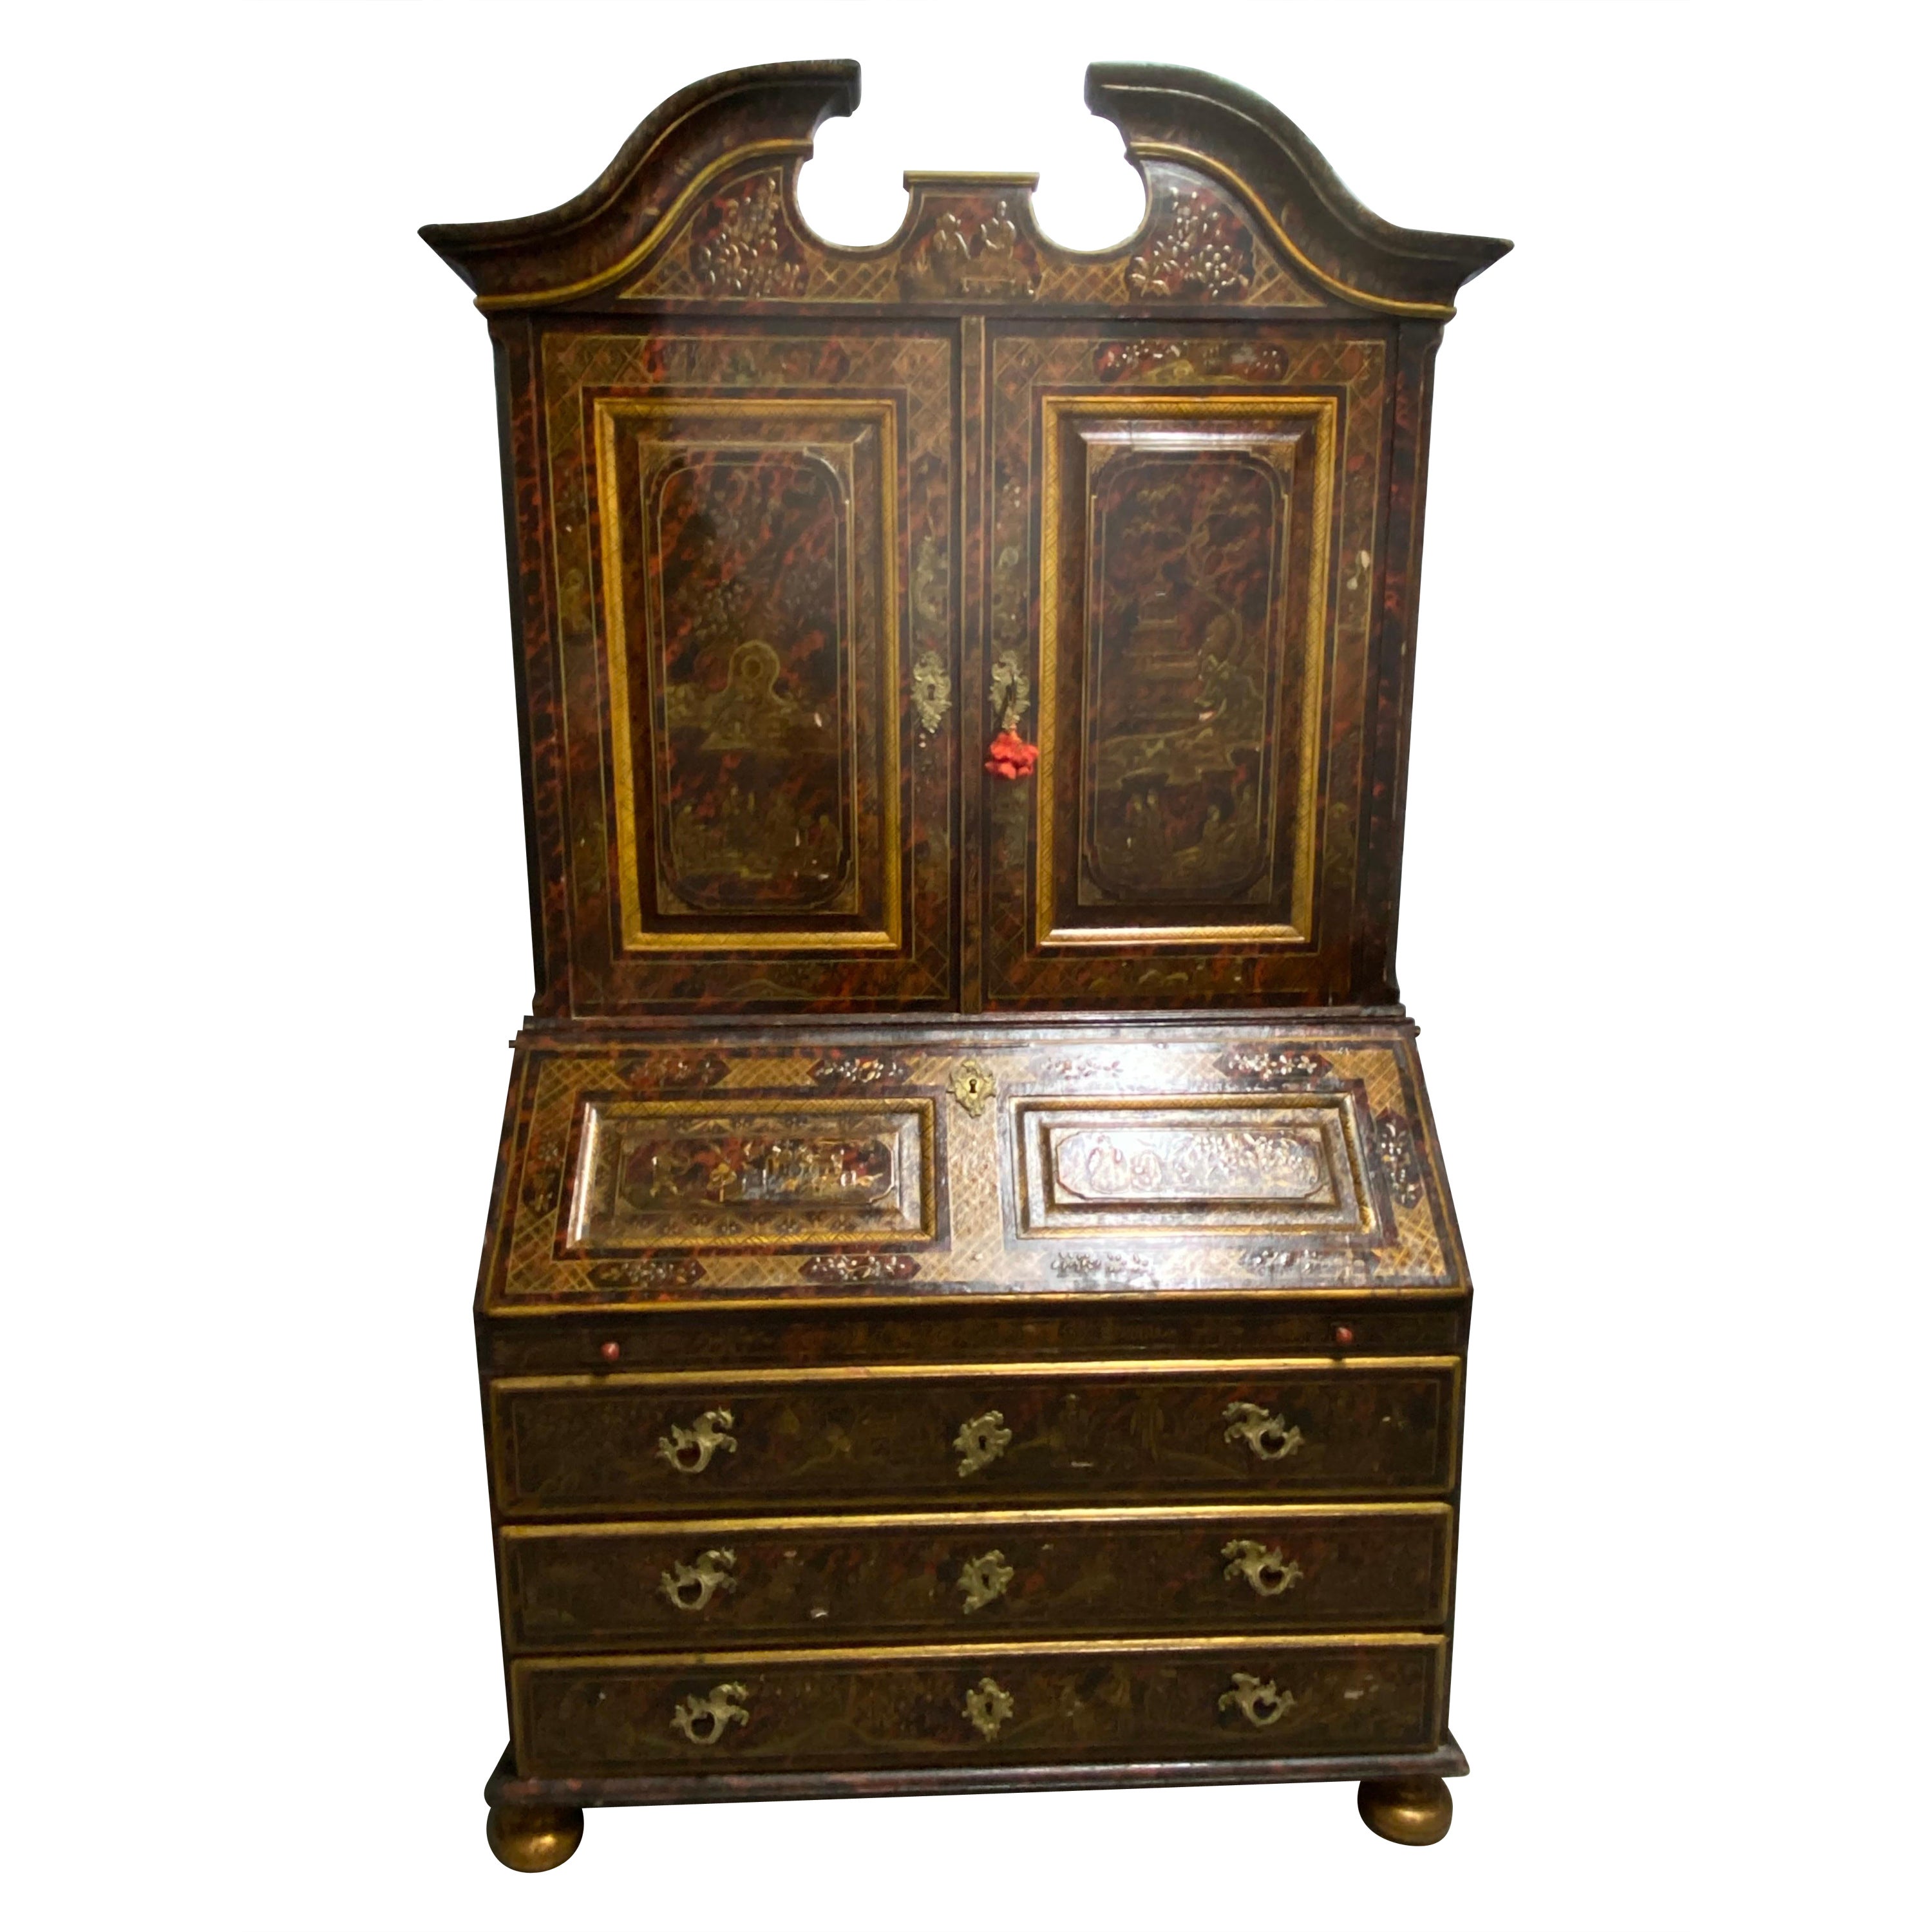 18th Century Northern European Tortoiseshell Lacquer Japanned Bureau Cabinet For Sale